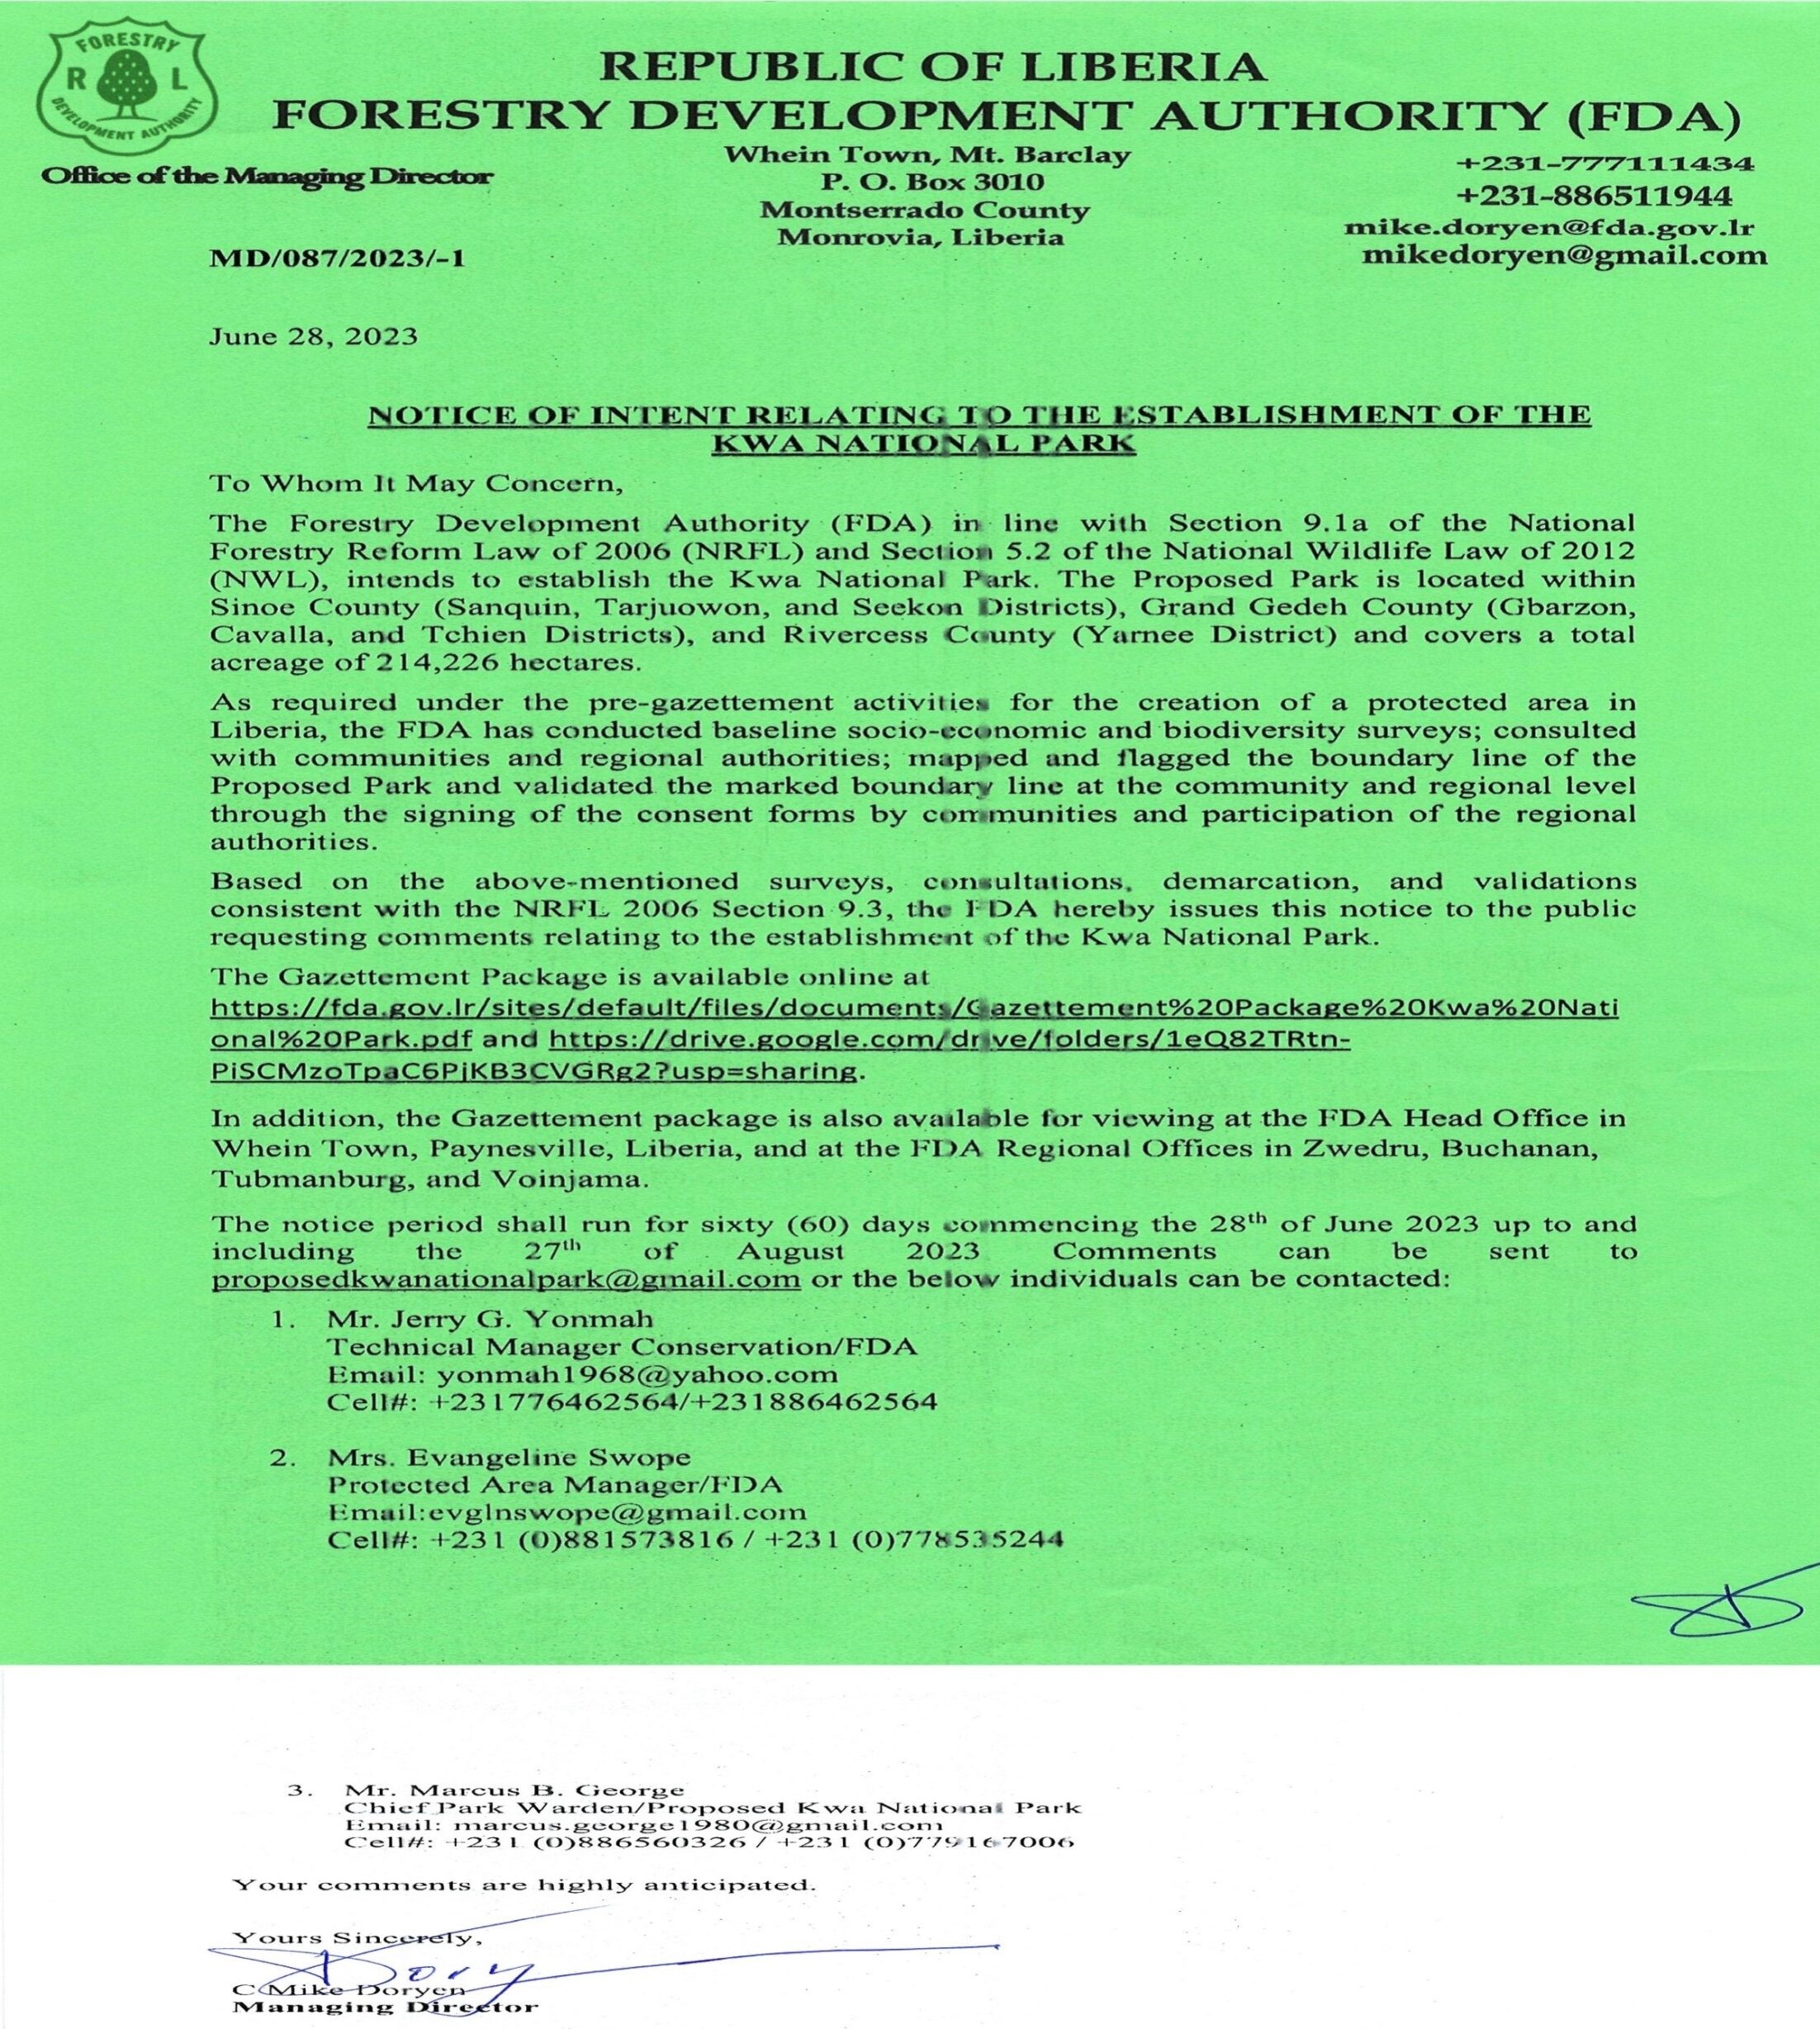 ublic Notice of Intend for the Establishment of Kwa National Park